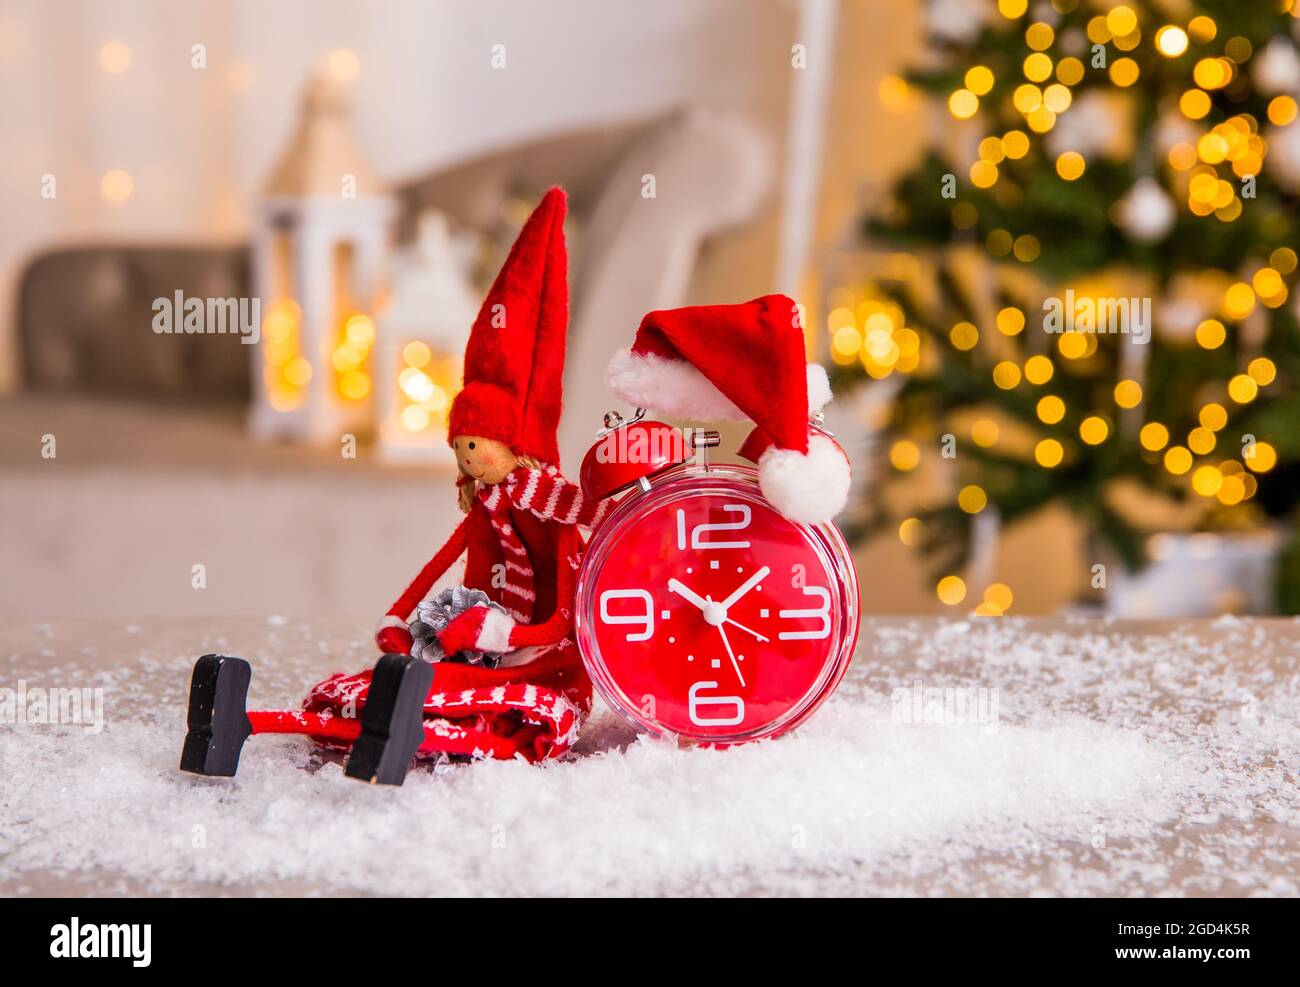 Decorative felt elf, red vintage alarm clock with small Christmas hat on artificial snow, blurred Christmas tree with gifts and white illuminated. Stock Photo